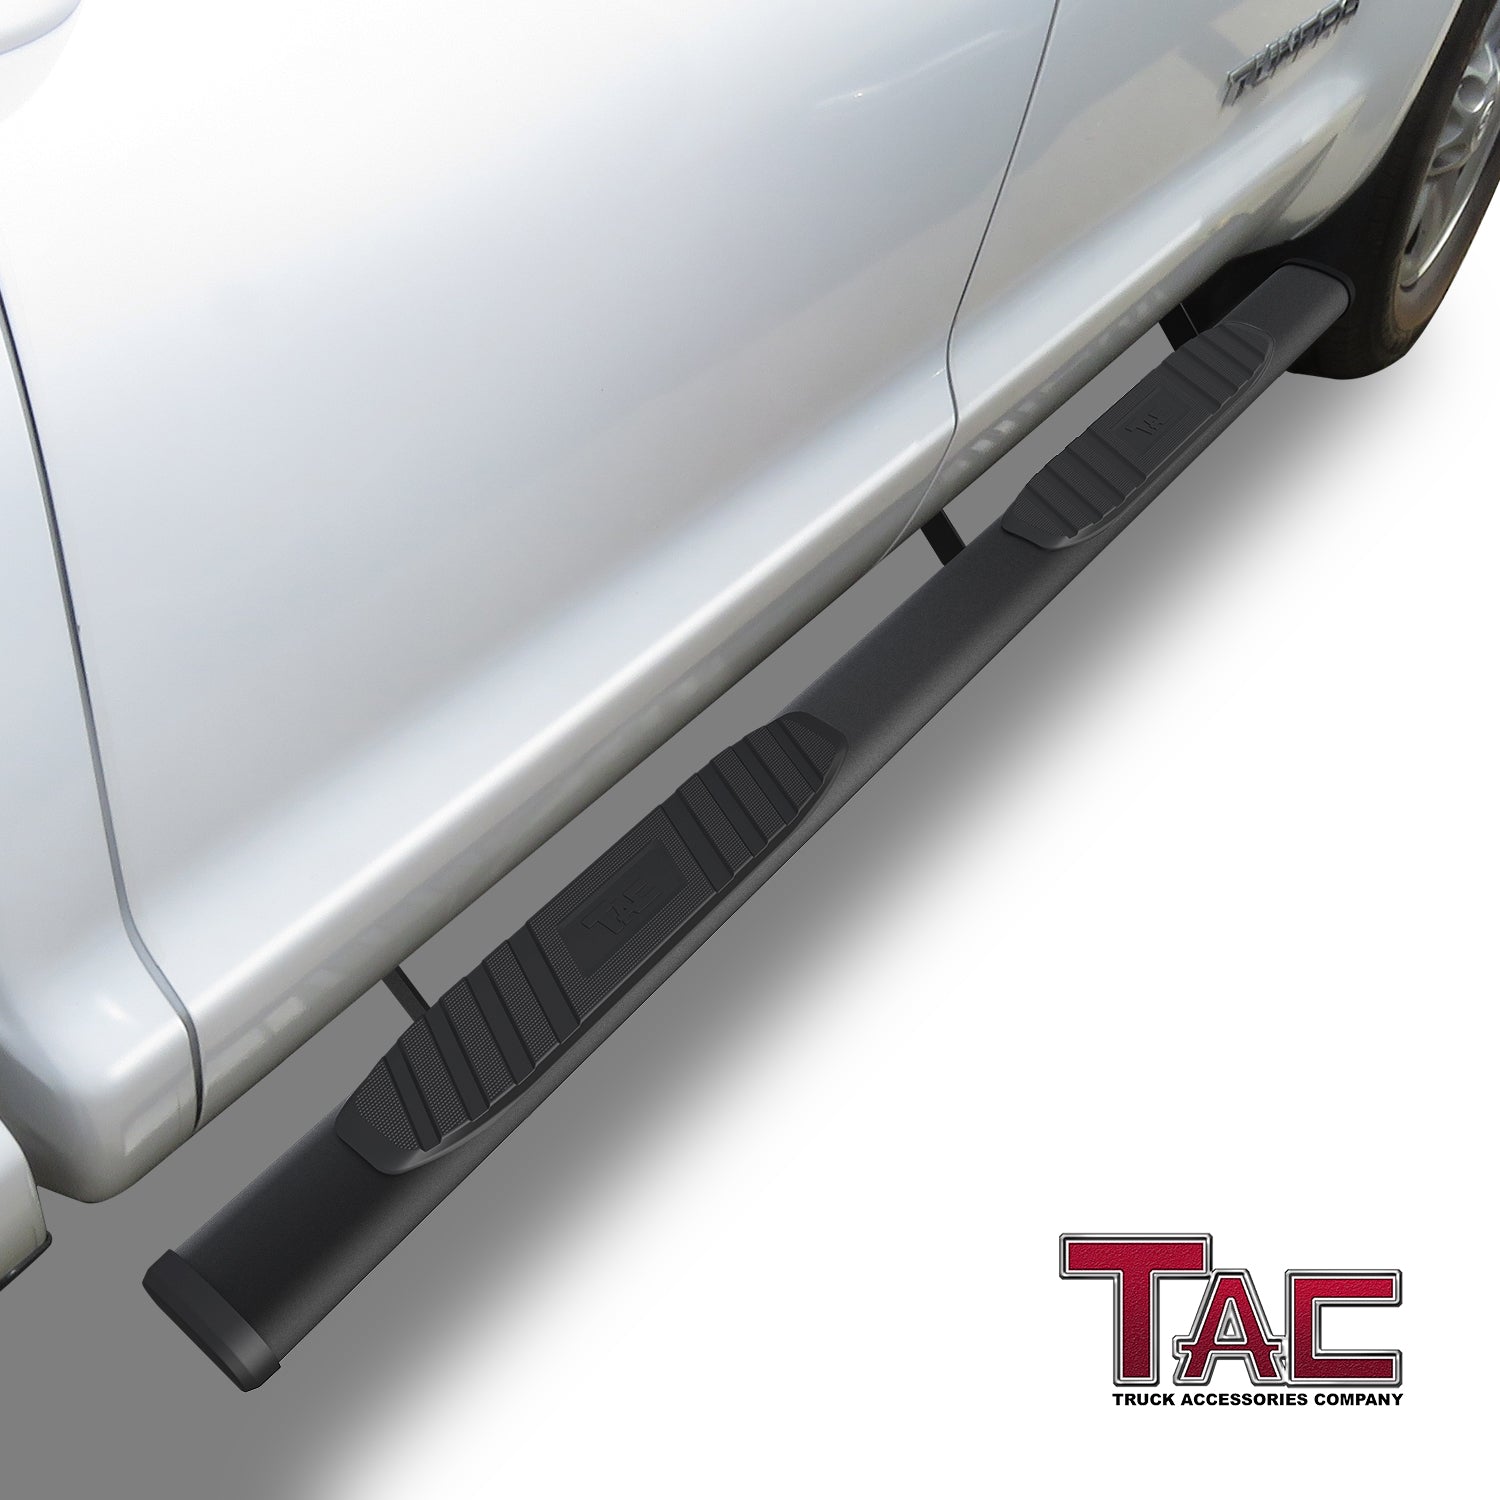 TAC Arrow Side Steps Running Boards Compatible with 2007-2021 Toyota Tundra Double Cab Truck Pickup 5” Aluminum Texture Black Step Rails Nerf Bars Lightweight Off Road Accessories 2Pcs - 0